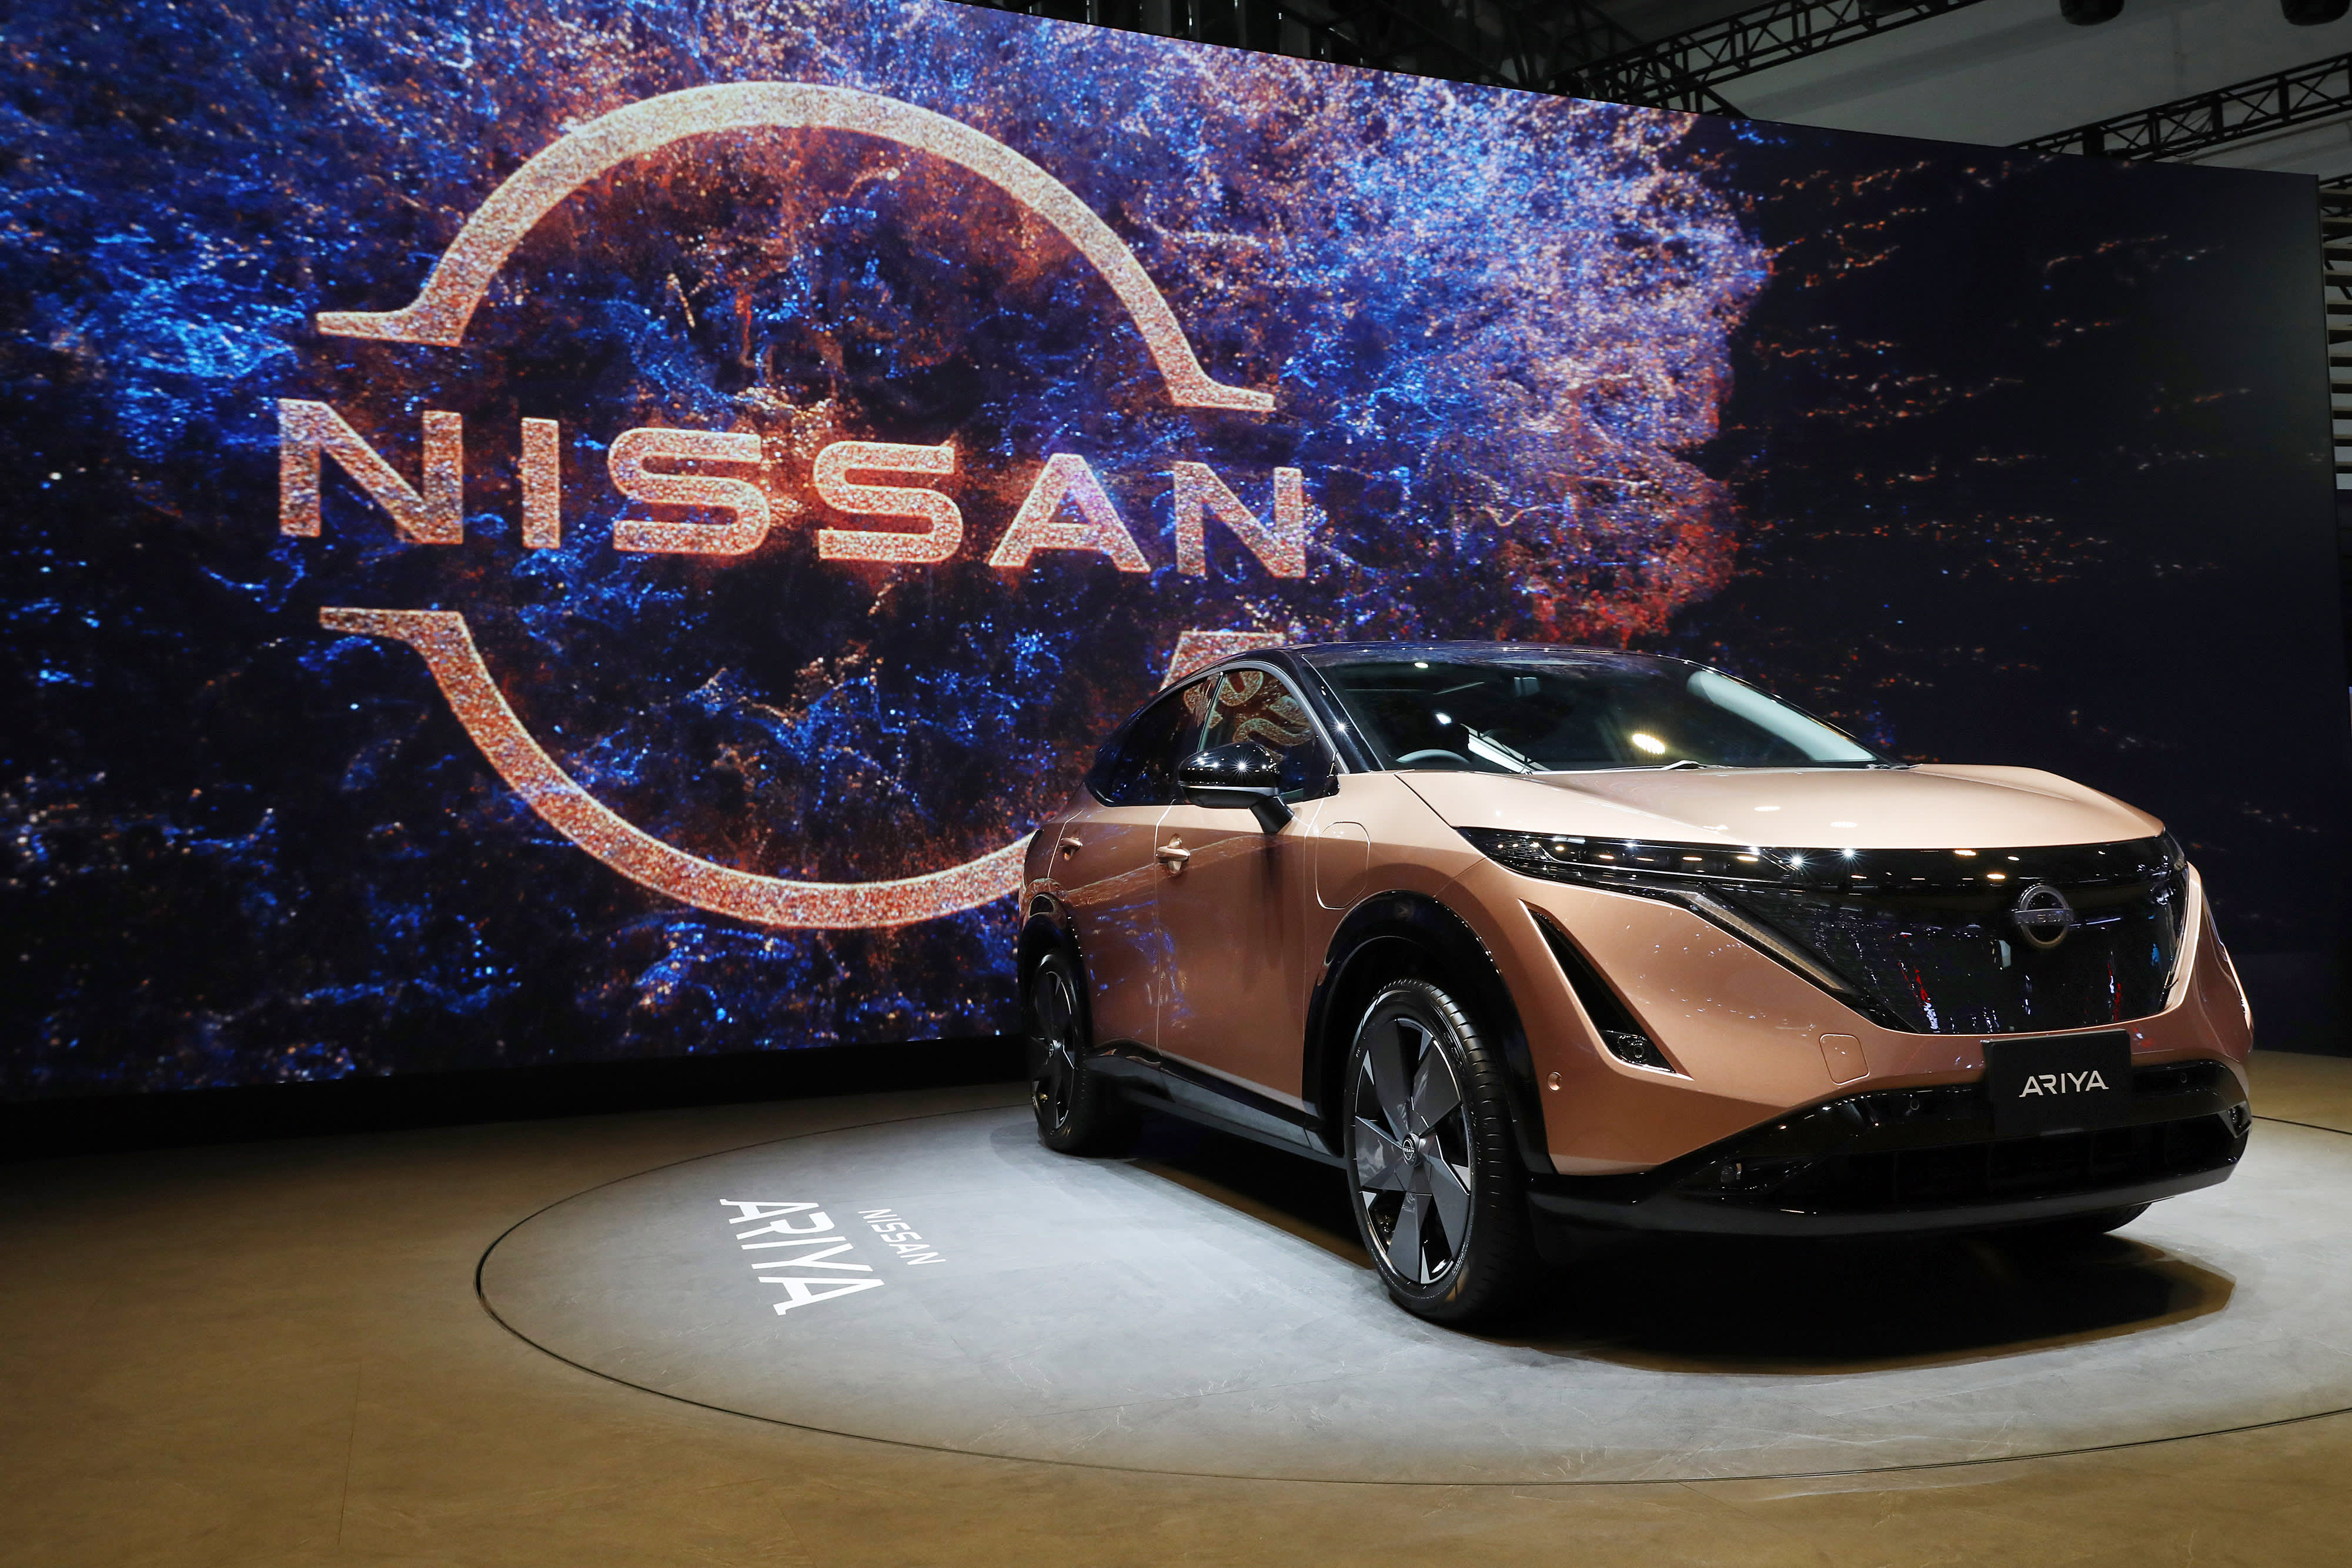 Nissan aims to sell an additional million vehicles over the next three years, and aims to reduce the costs of electric cars